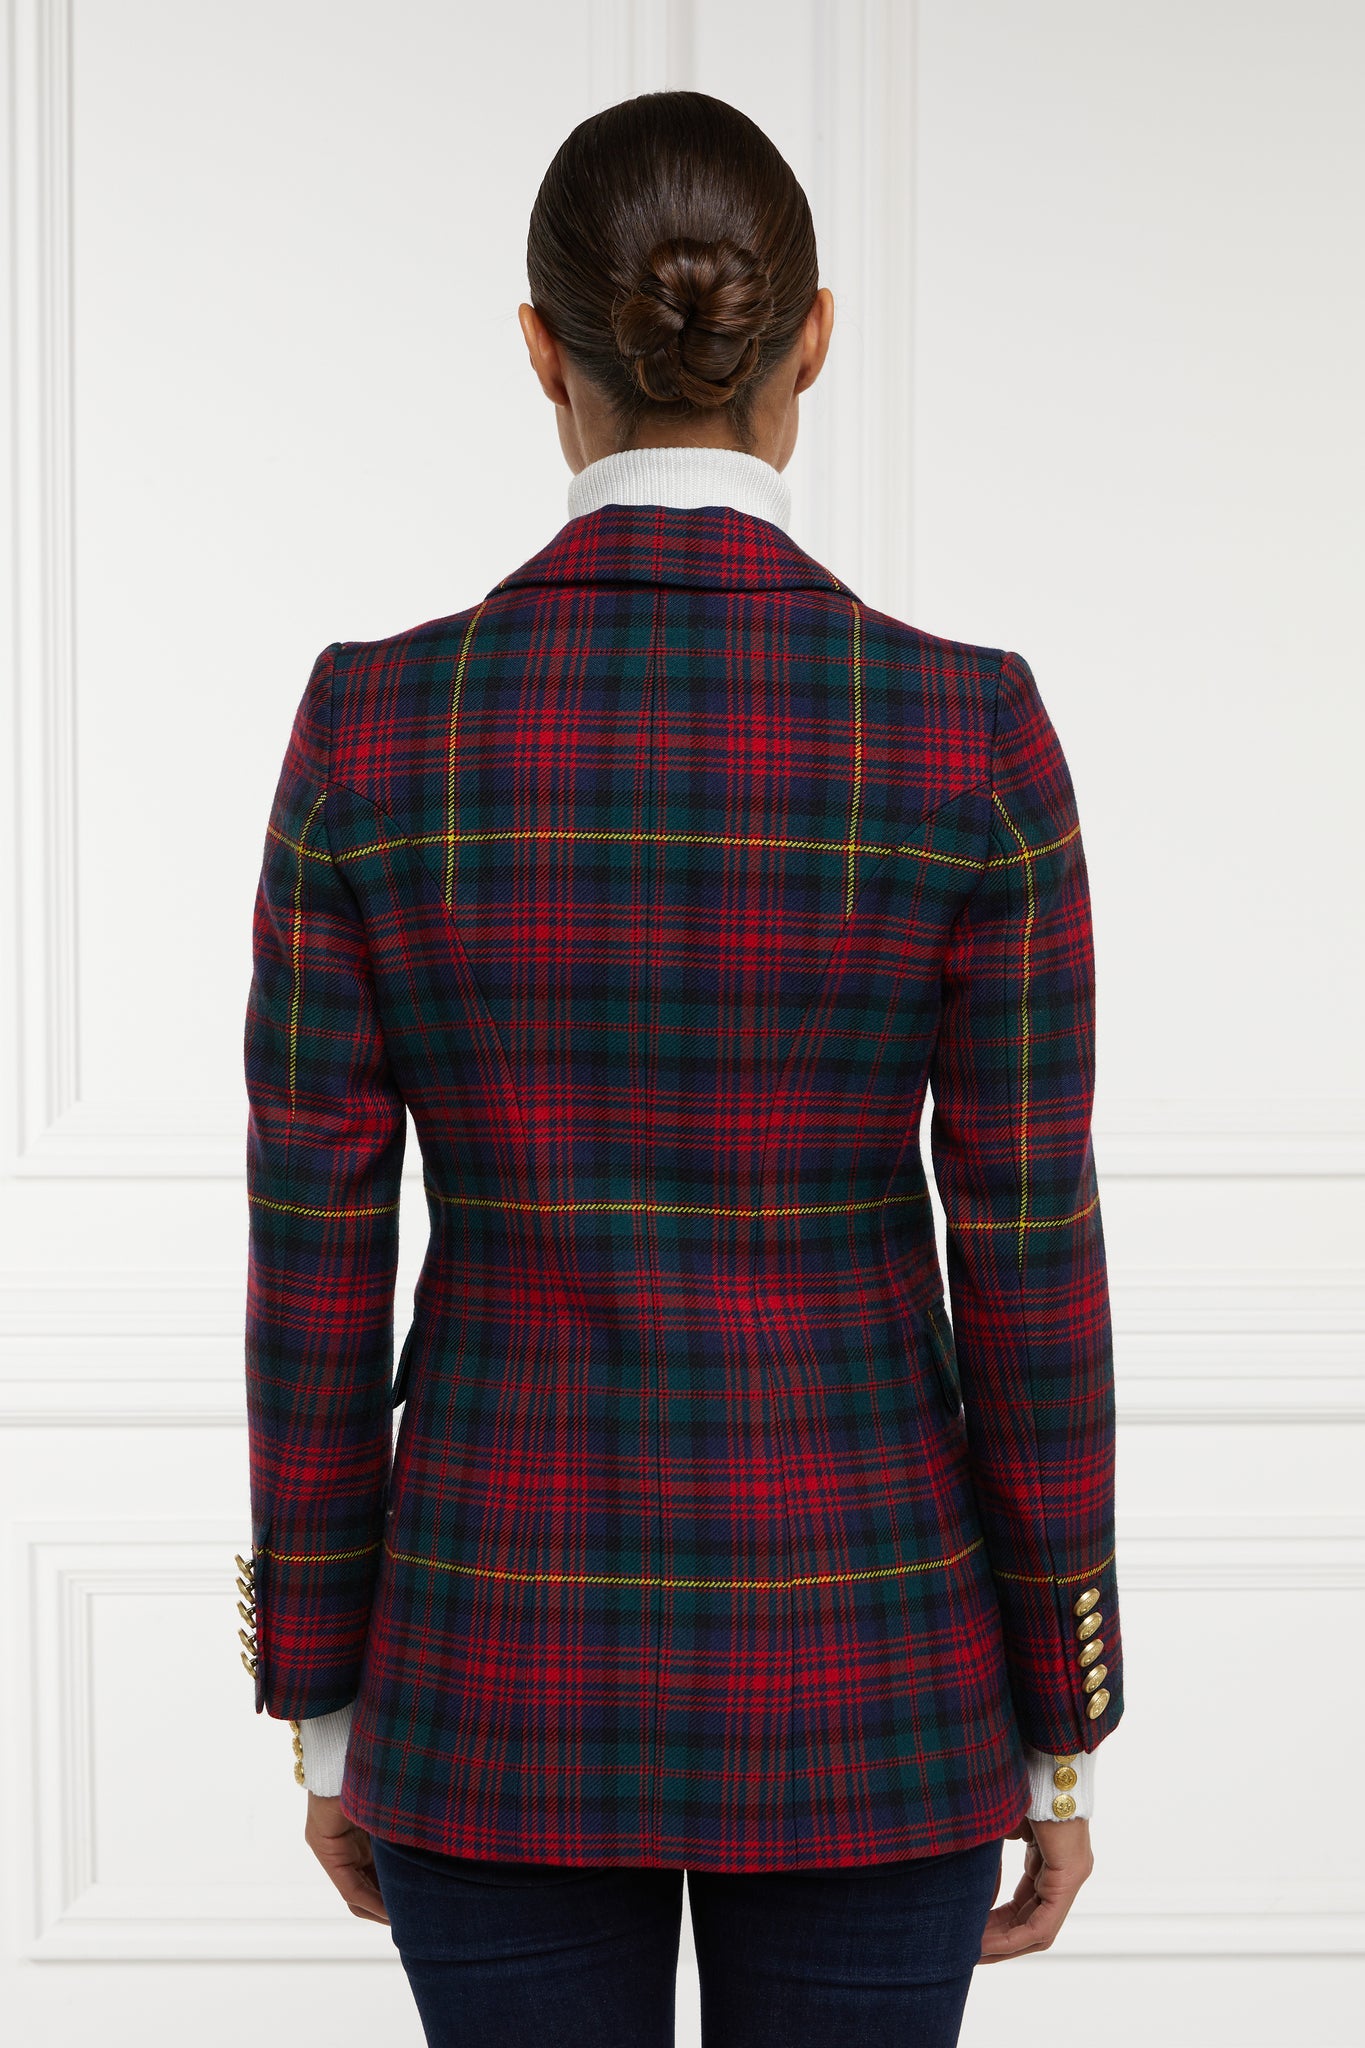 back of double breasted wool blazer in dark red navy green and yellow logan tartan with two hip pockets and gold button details down front and on cuffs and handmade in the uk